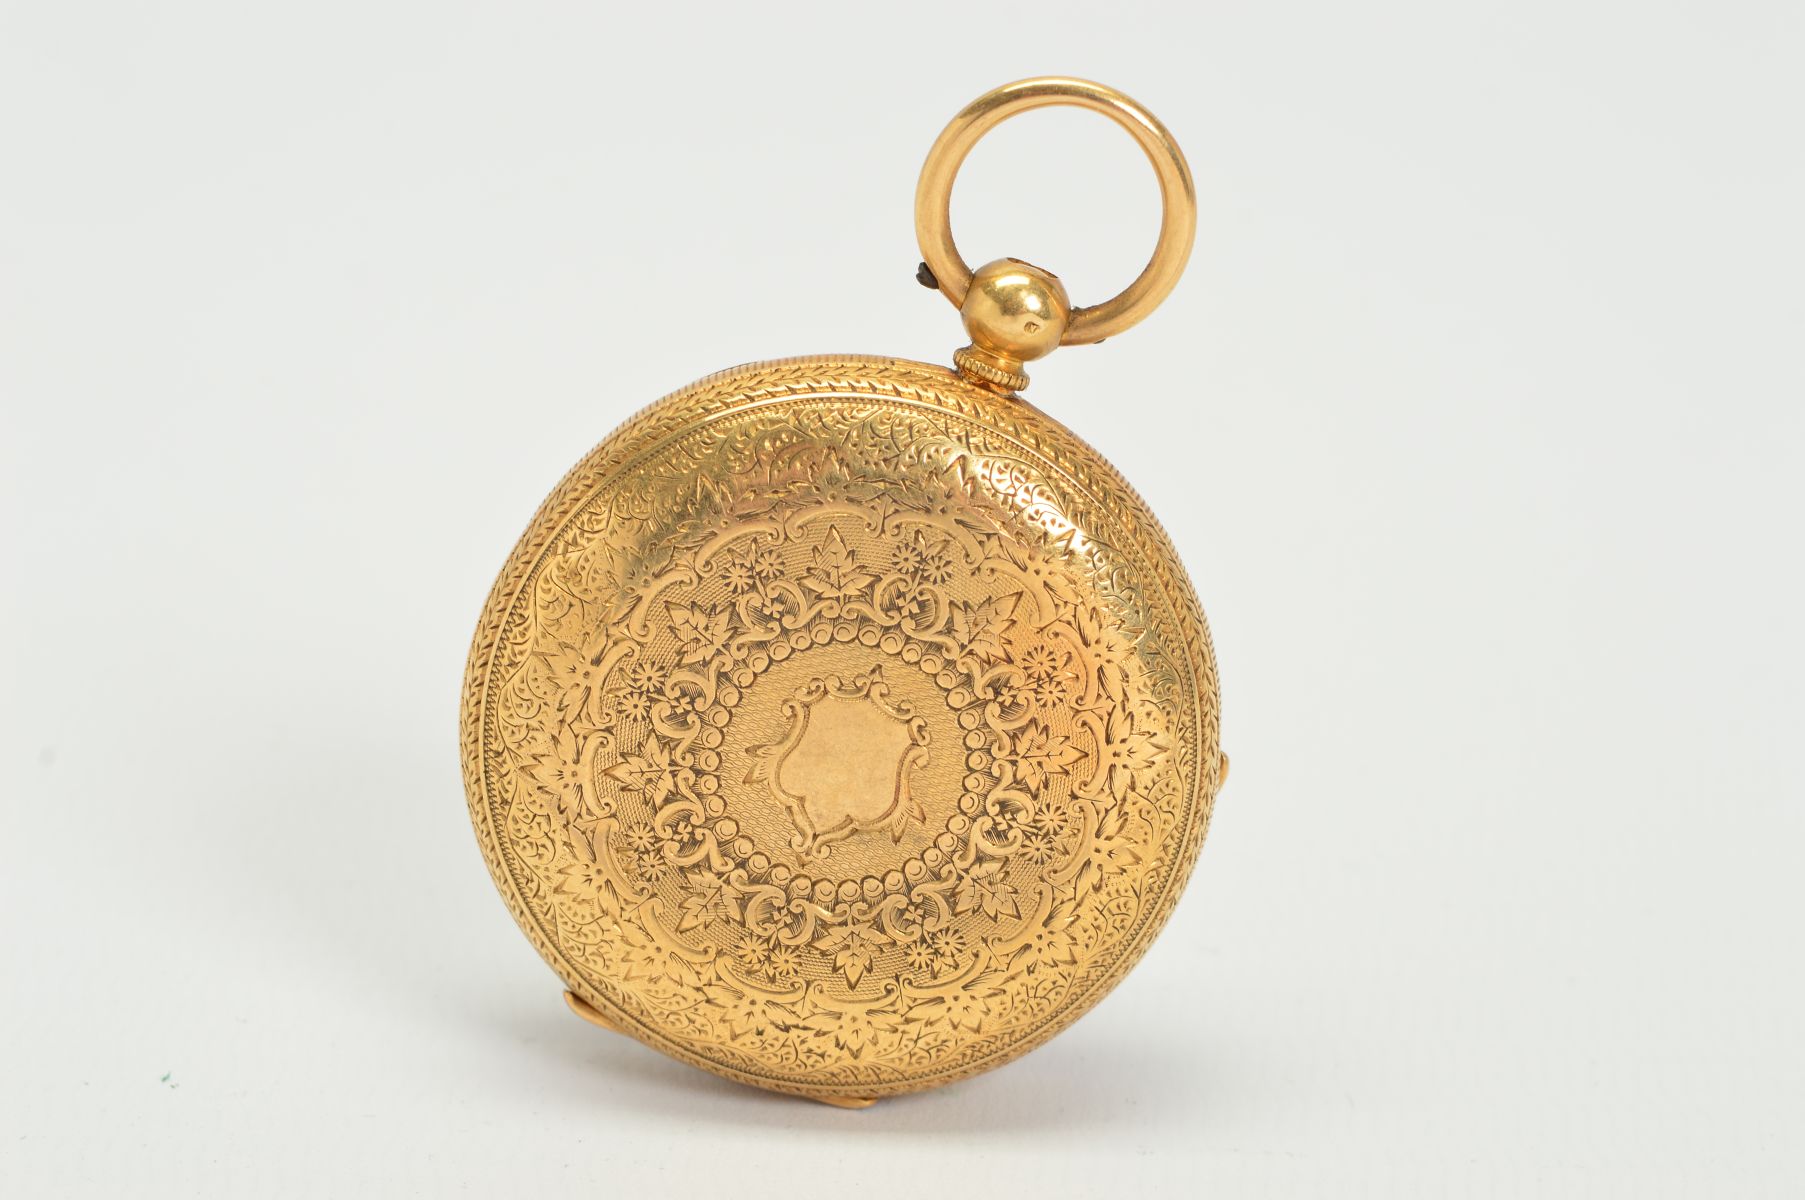 AN 18CT GOLD POCKET WATCH, measuring approximately 38mm in diameter, fancy floral dial, blue steeled - Image 5 of 5